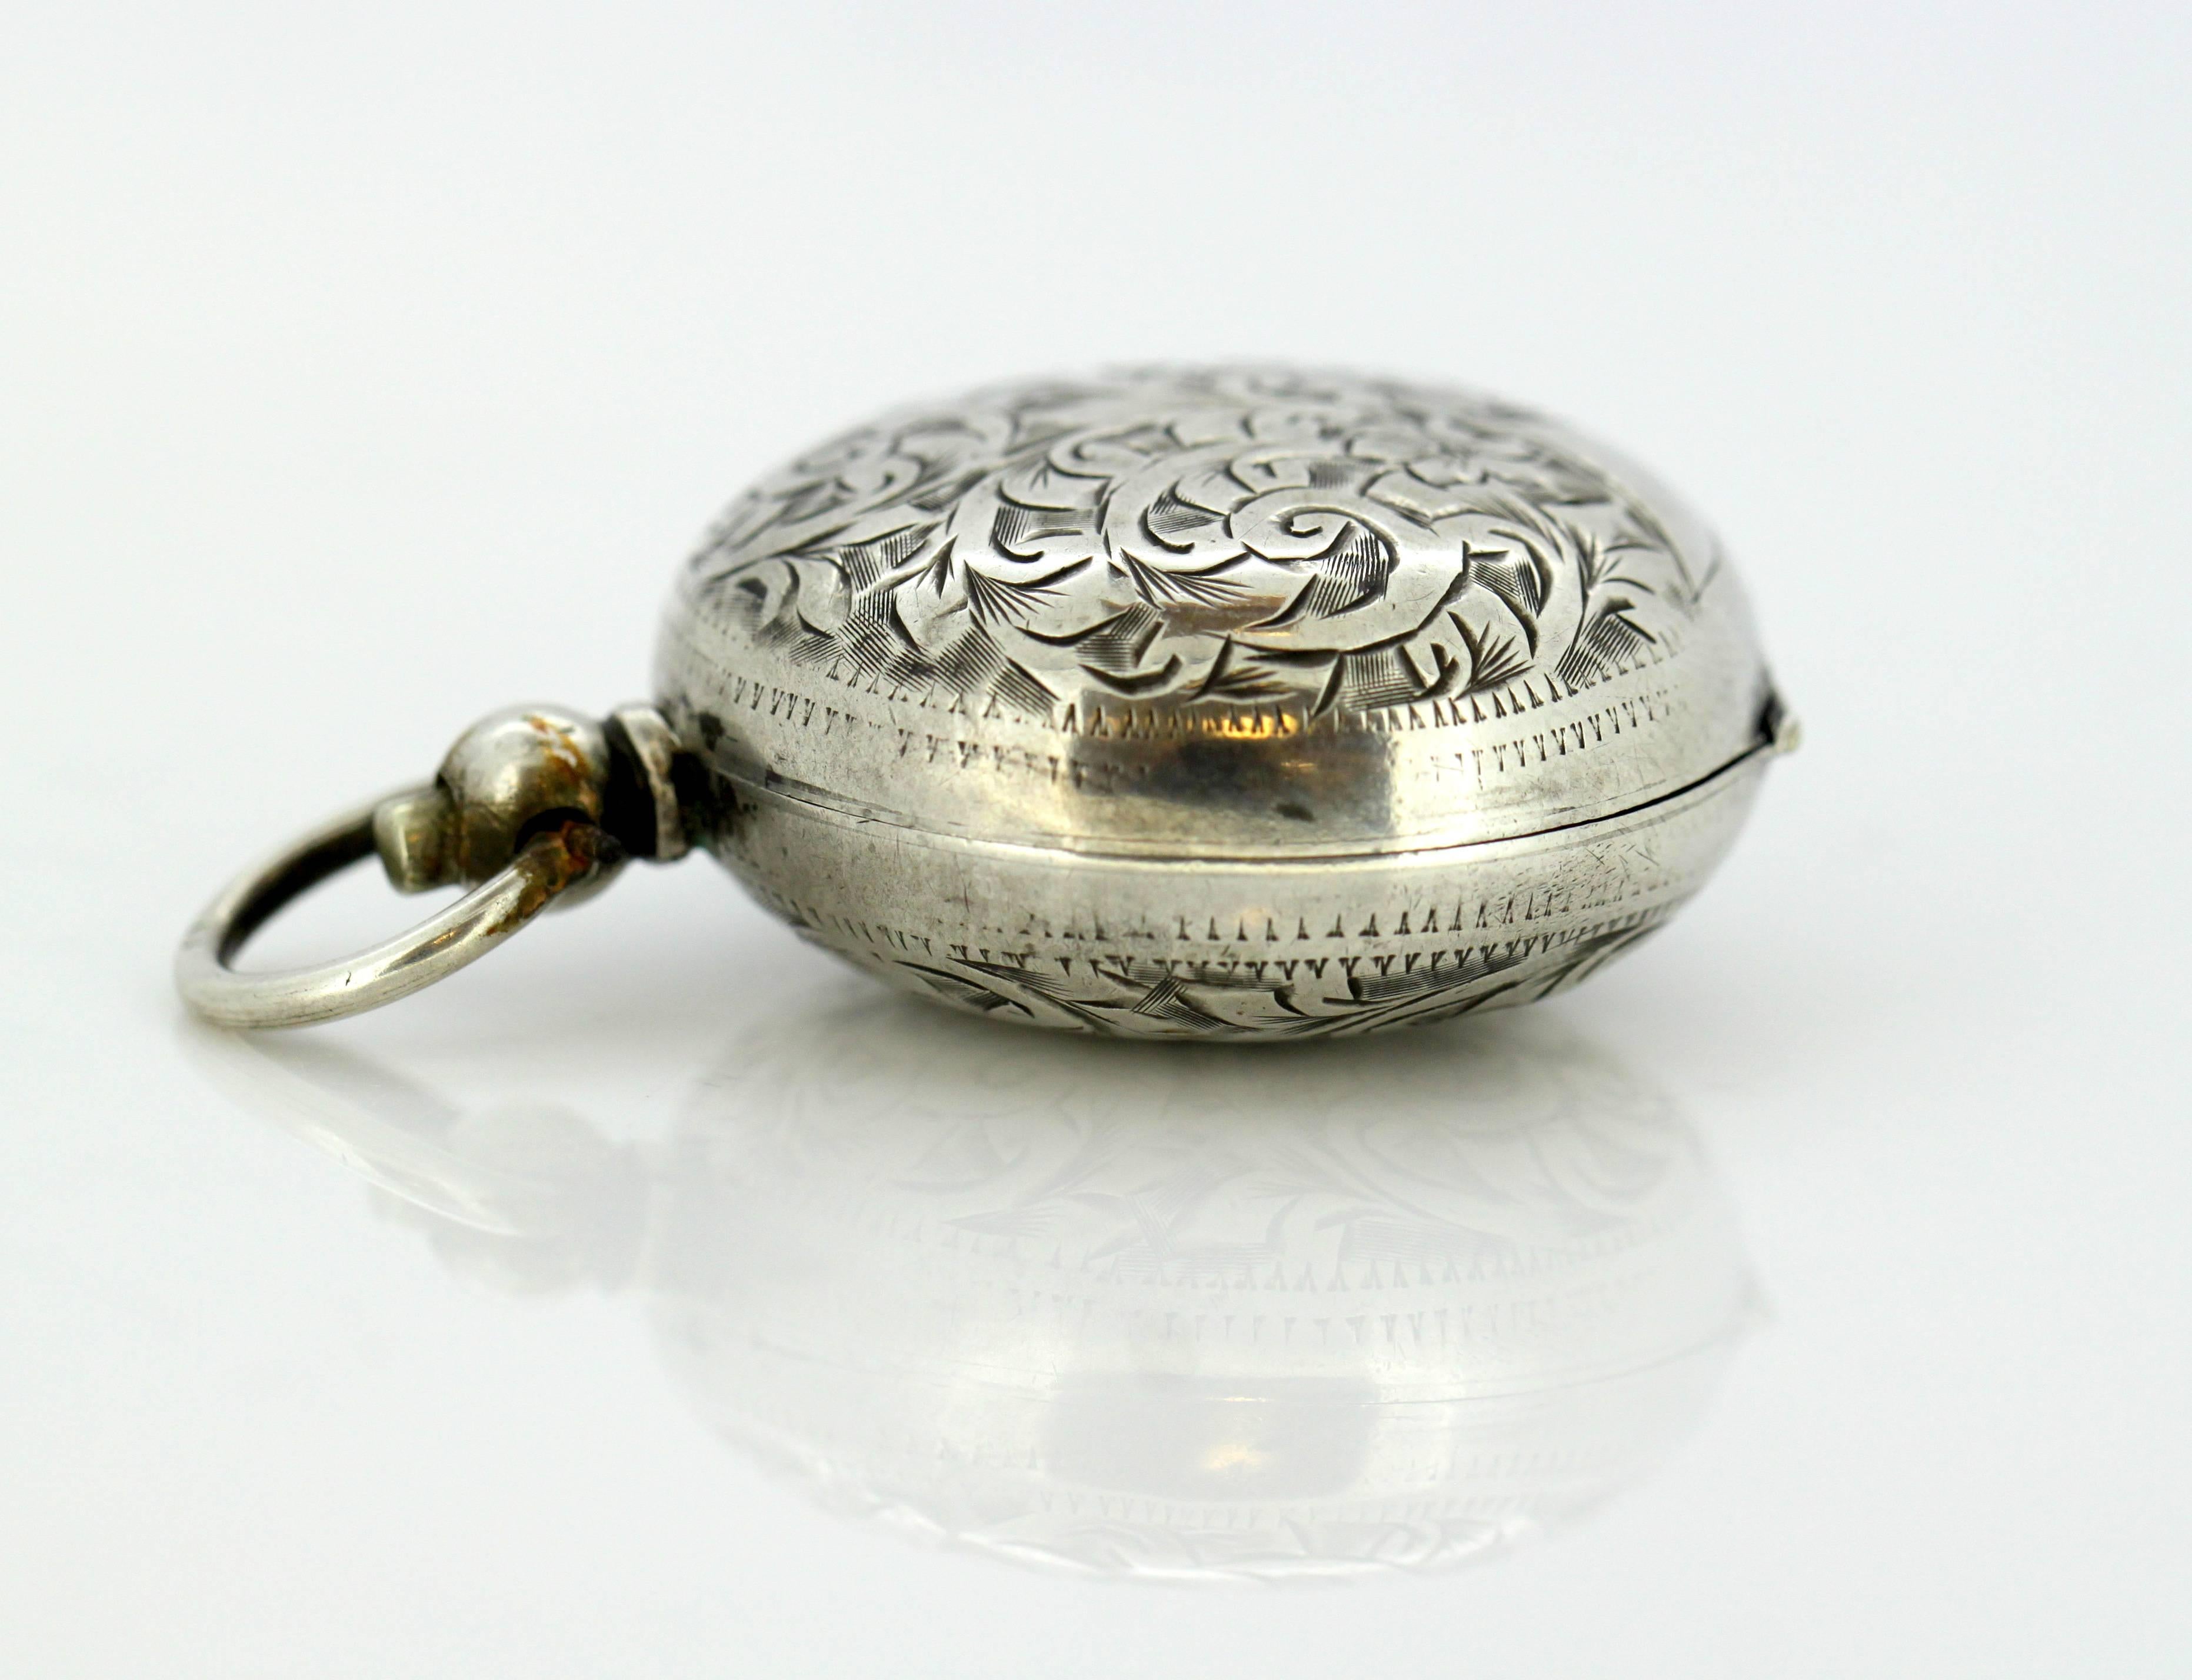 Antique sterling silver sovereign / coin case
Maker: Albert Jackson
Made in Birmingham 1907
Fully hallmarked. 

Dimensions  
Size : 4.5 x 3 x 1.5 cm 
Weight: 18 grams 

Condition report: Surface wear and tear from general usage, has some